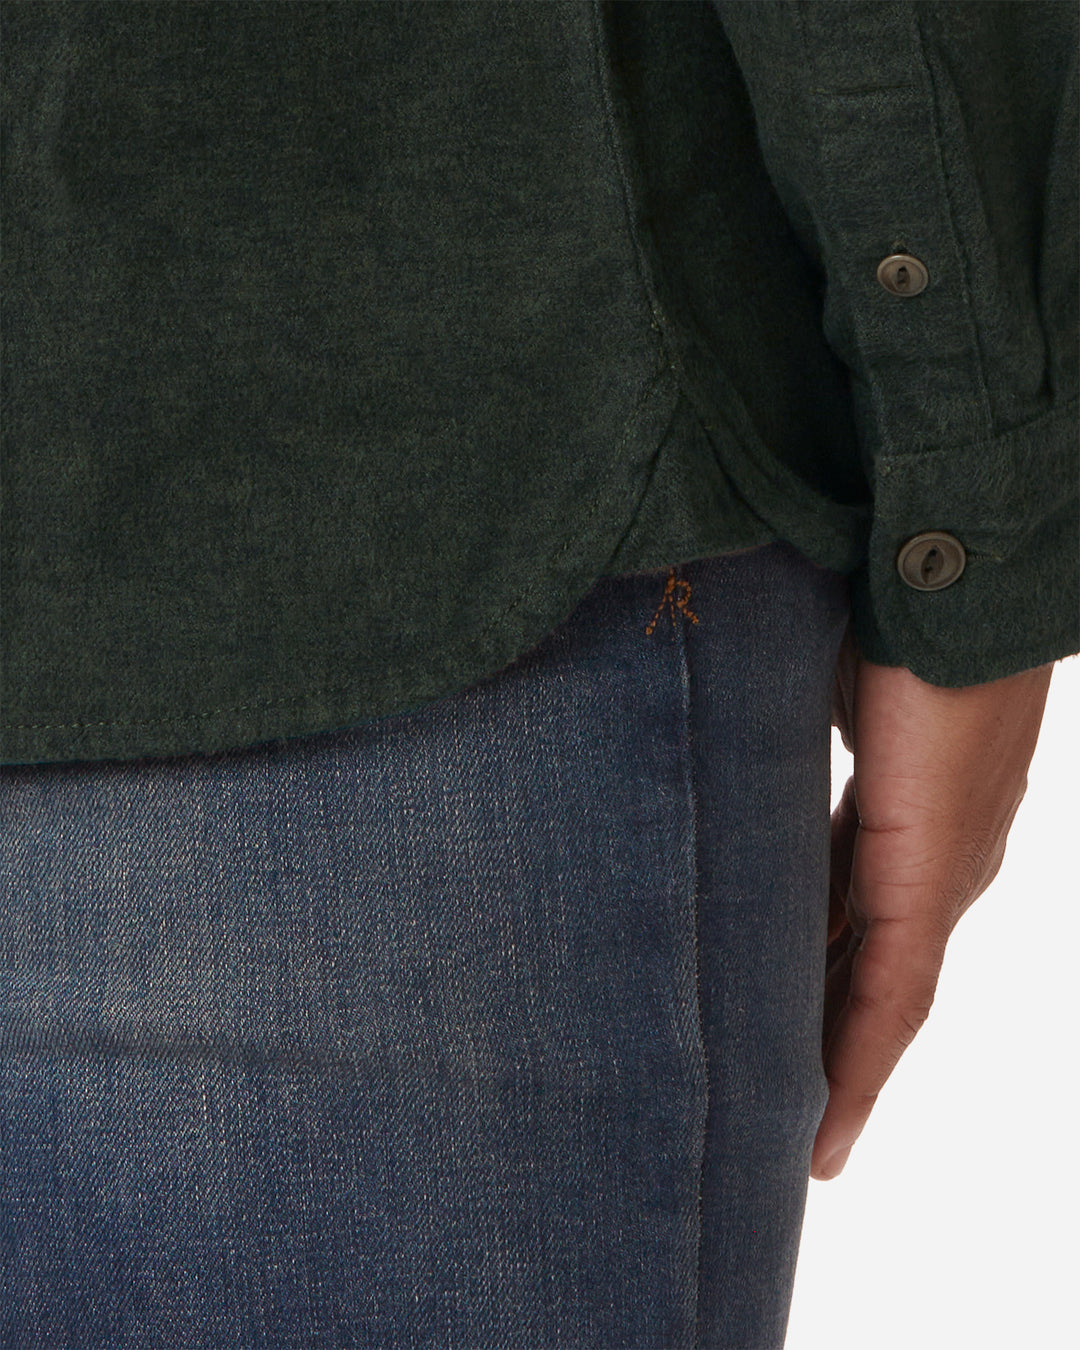 Signature "AR" stitching and bottom flannel hem on model wearing Ace Rivington men's forest green flannel with brown buttons and a white collar stripe and Ace Rivington dirty vintage blue denim jeans